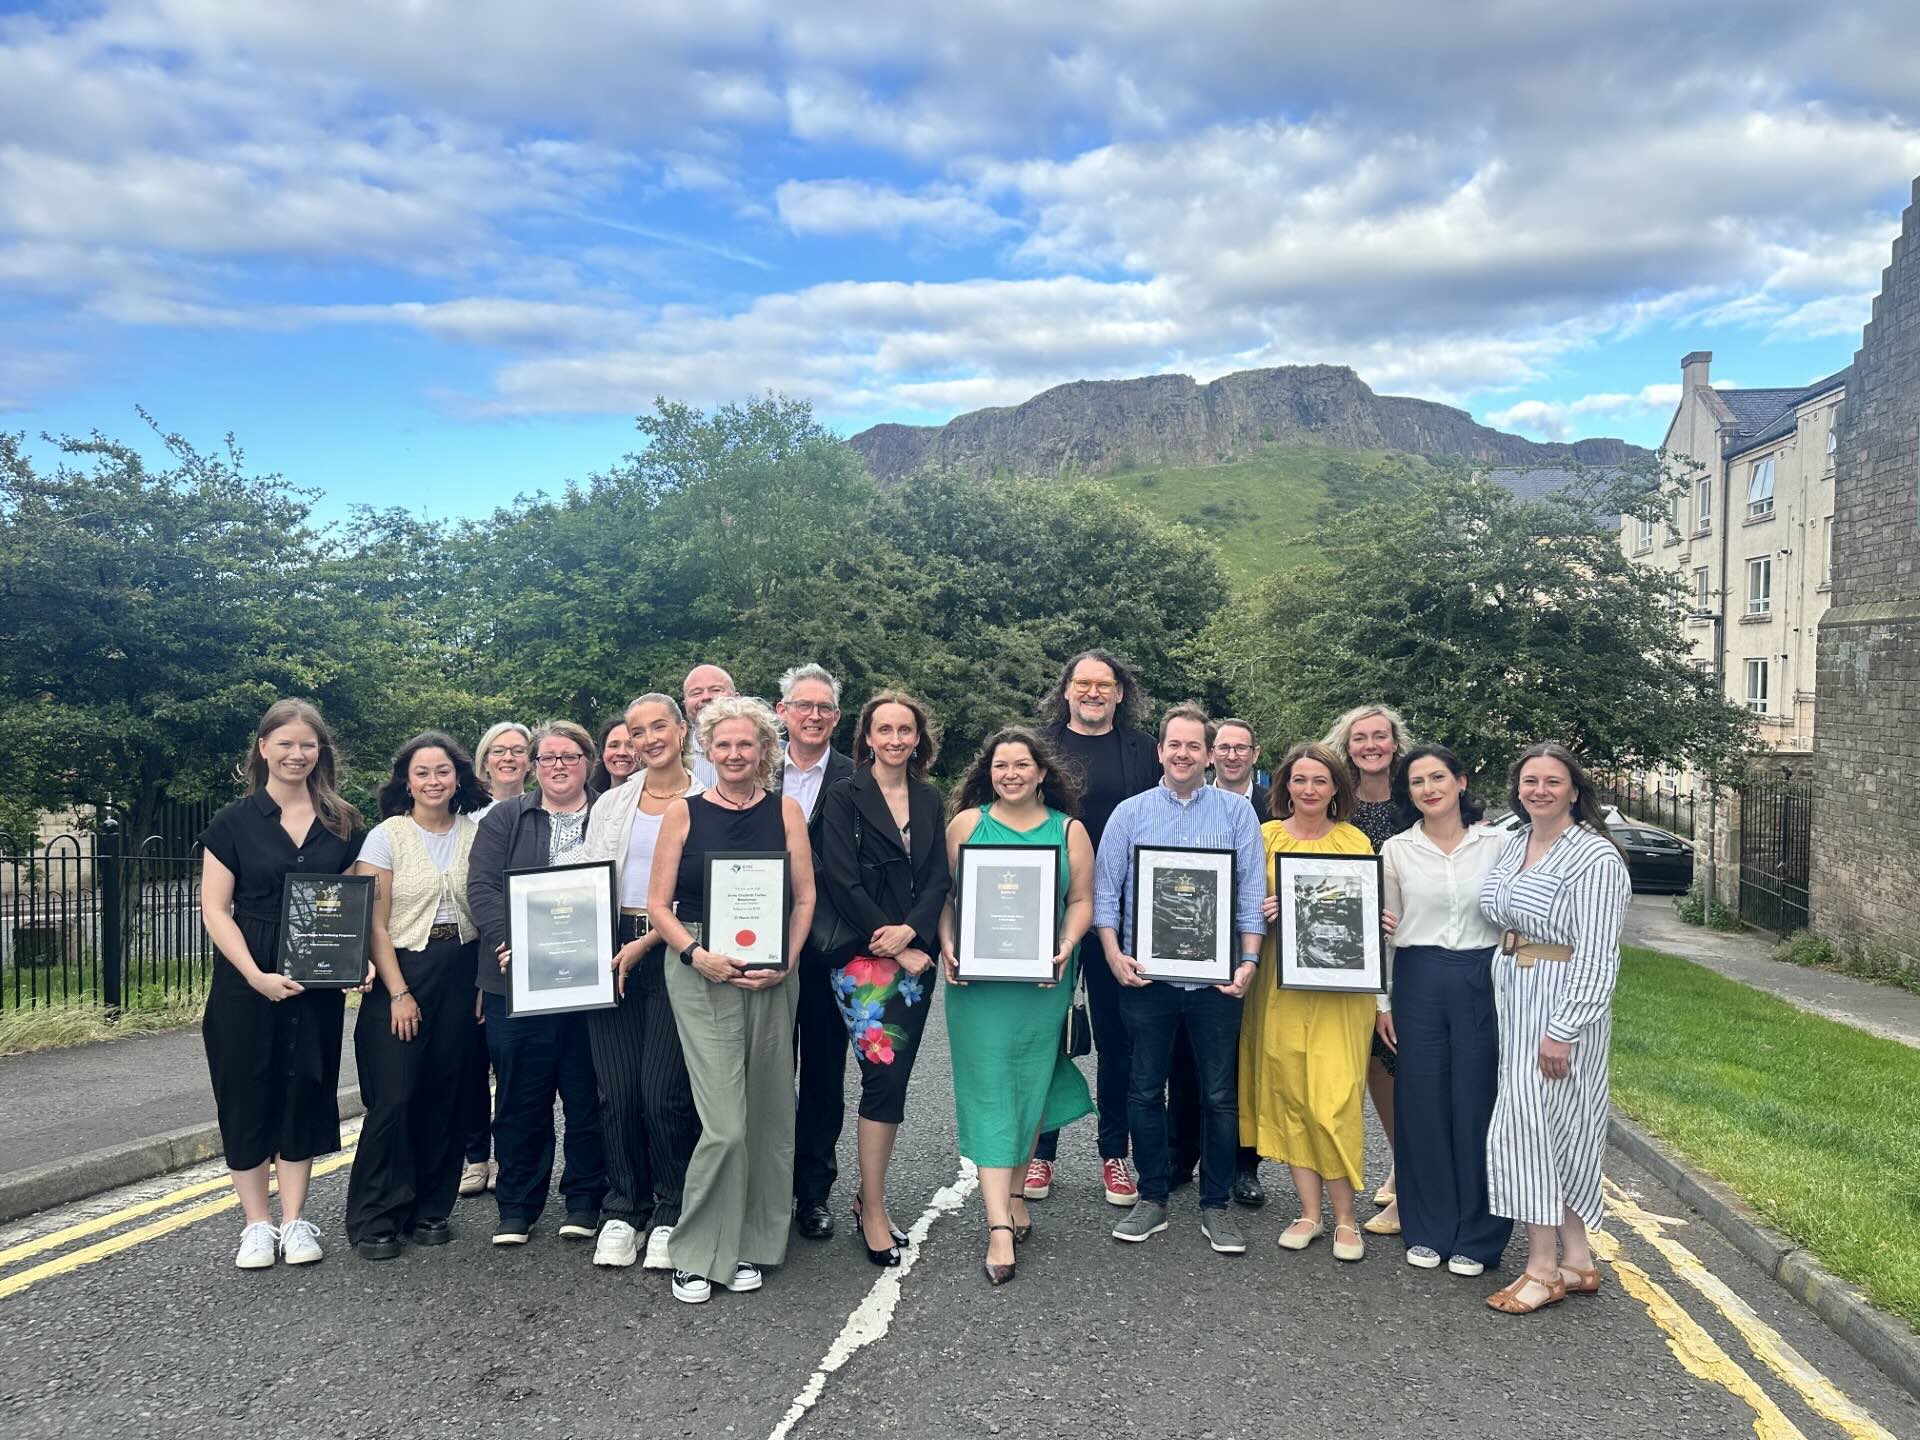 A group of people standing in front of Arthurs Seat in Edinburgh holding framed award certificates